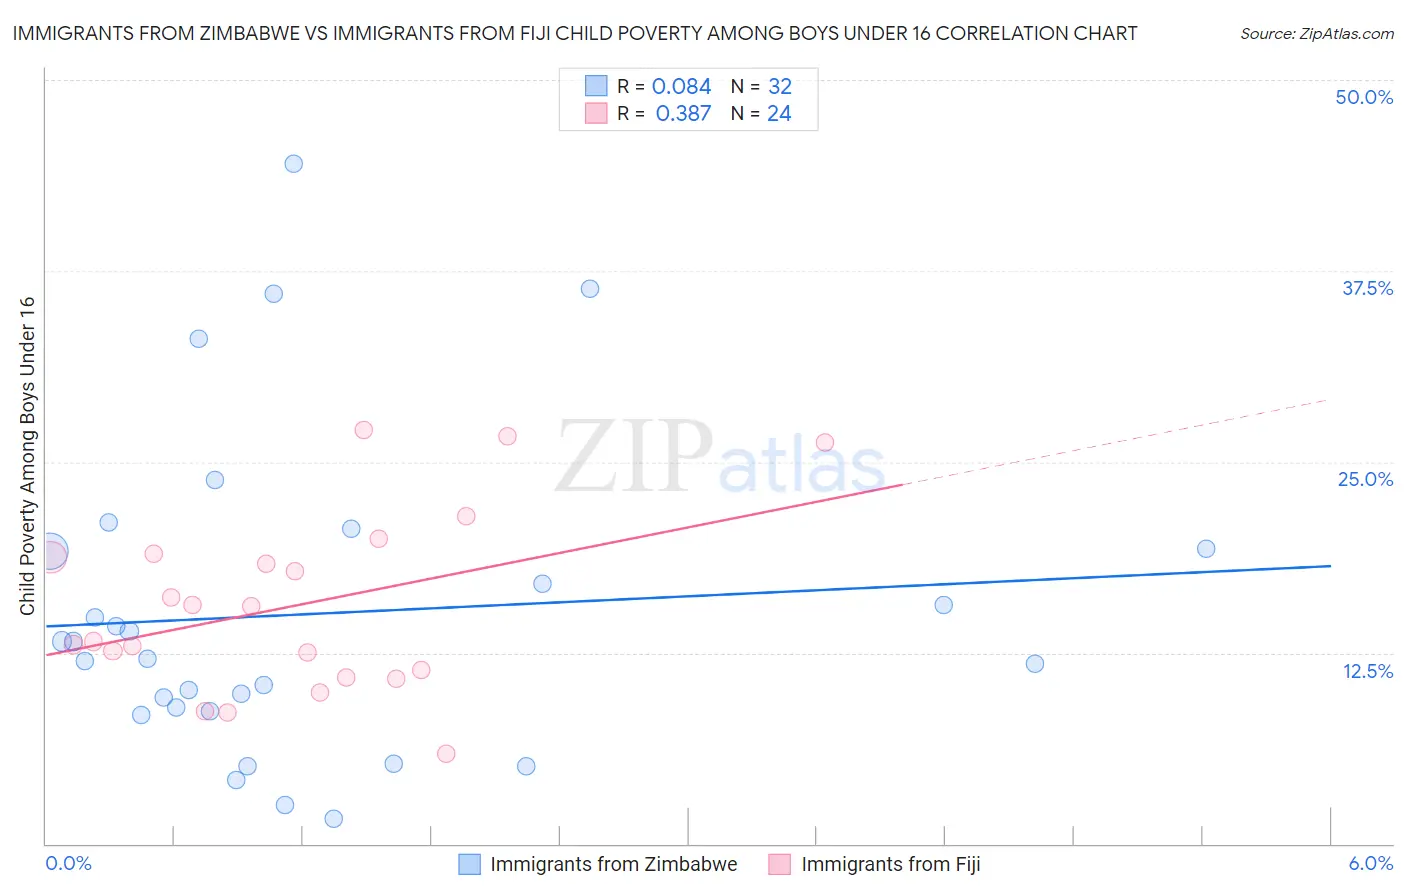 Immigrants from Zimbabwe vs Immigrants from Fiji Child Poverty Among Boys Under 16